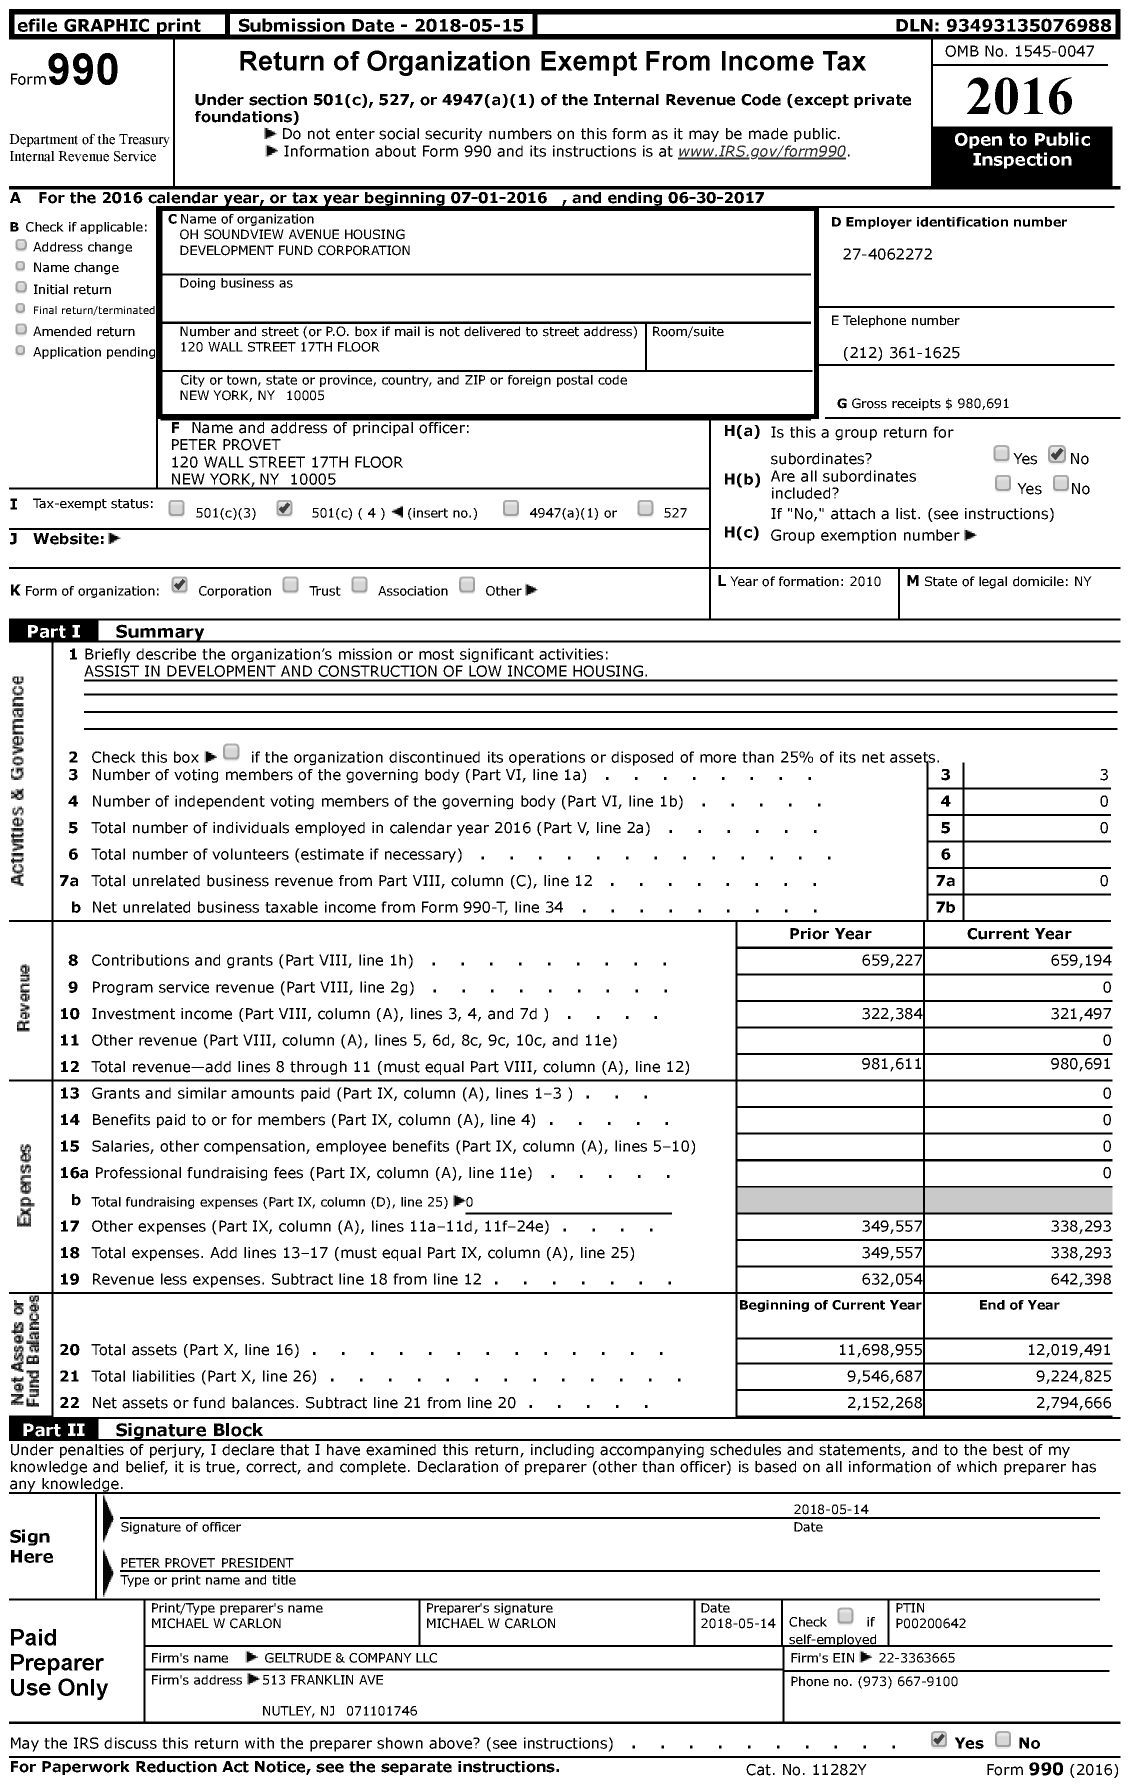 Image of first page of 2016 Form 990 for Oh Soundview Avenue Housing Development Fund Corporation